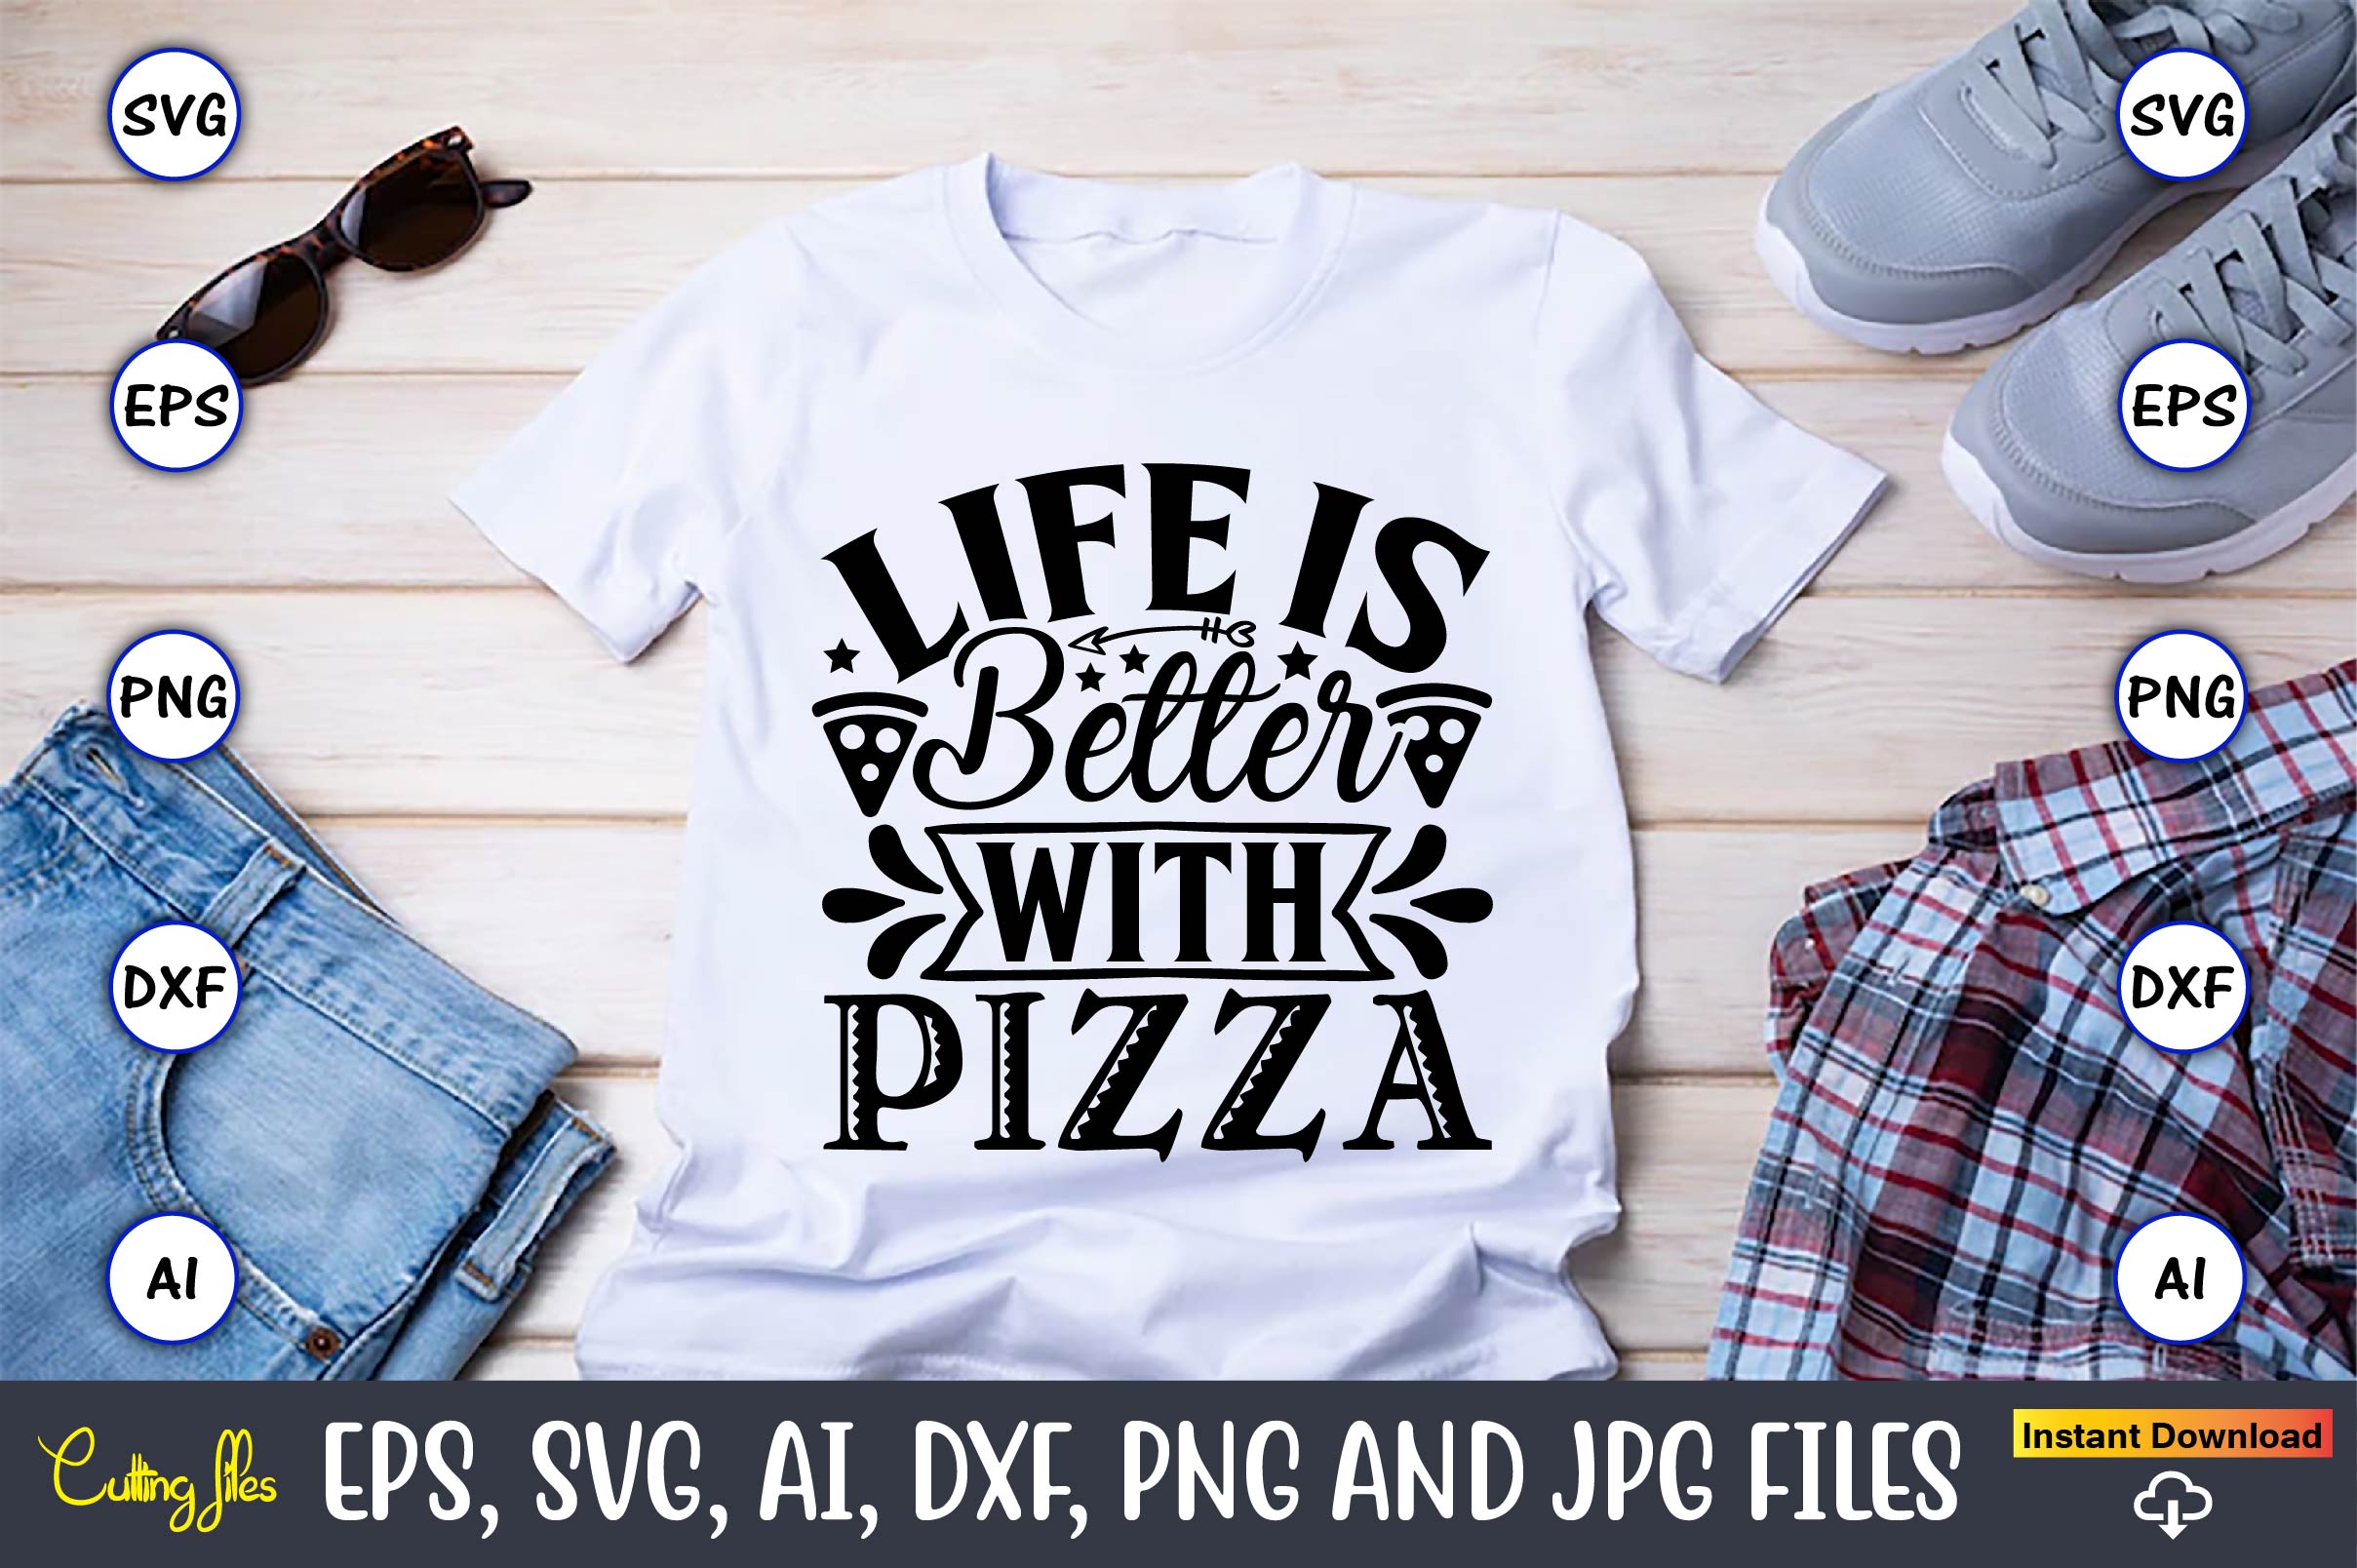 Image of a white t-shirt with the inscription Life is better with pizza.